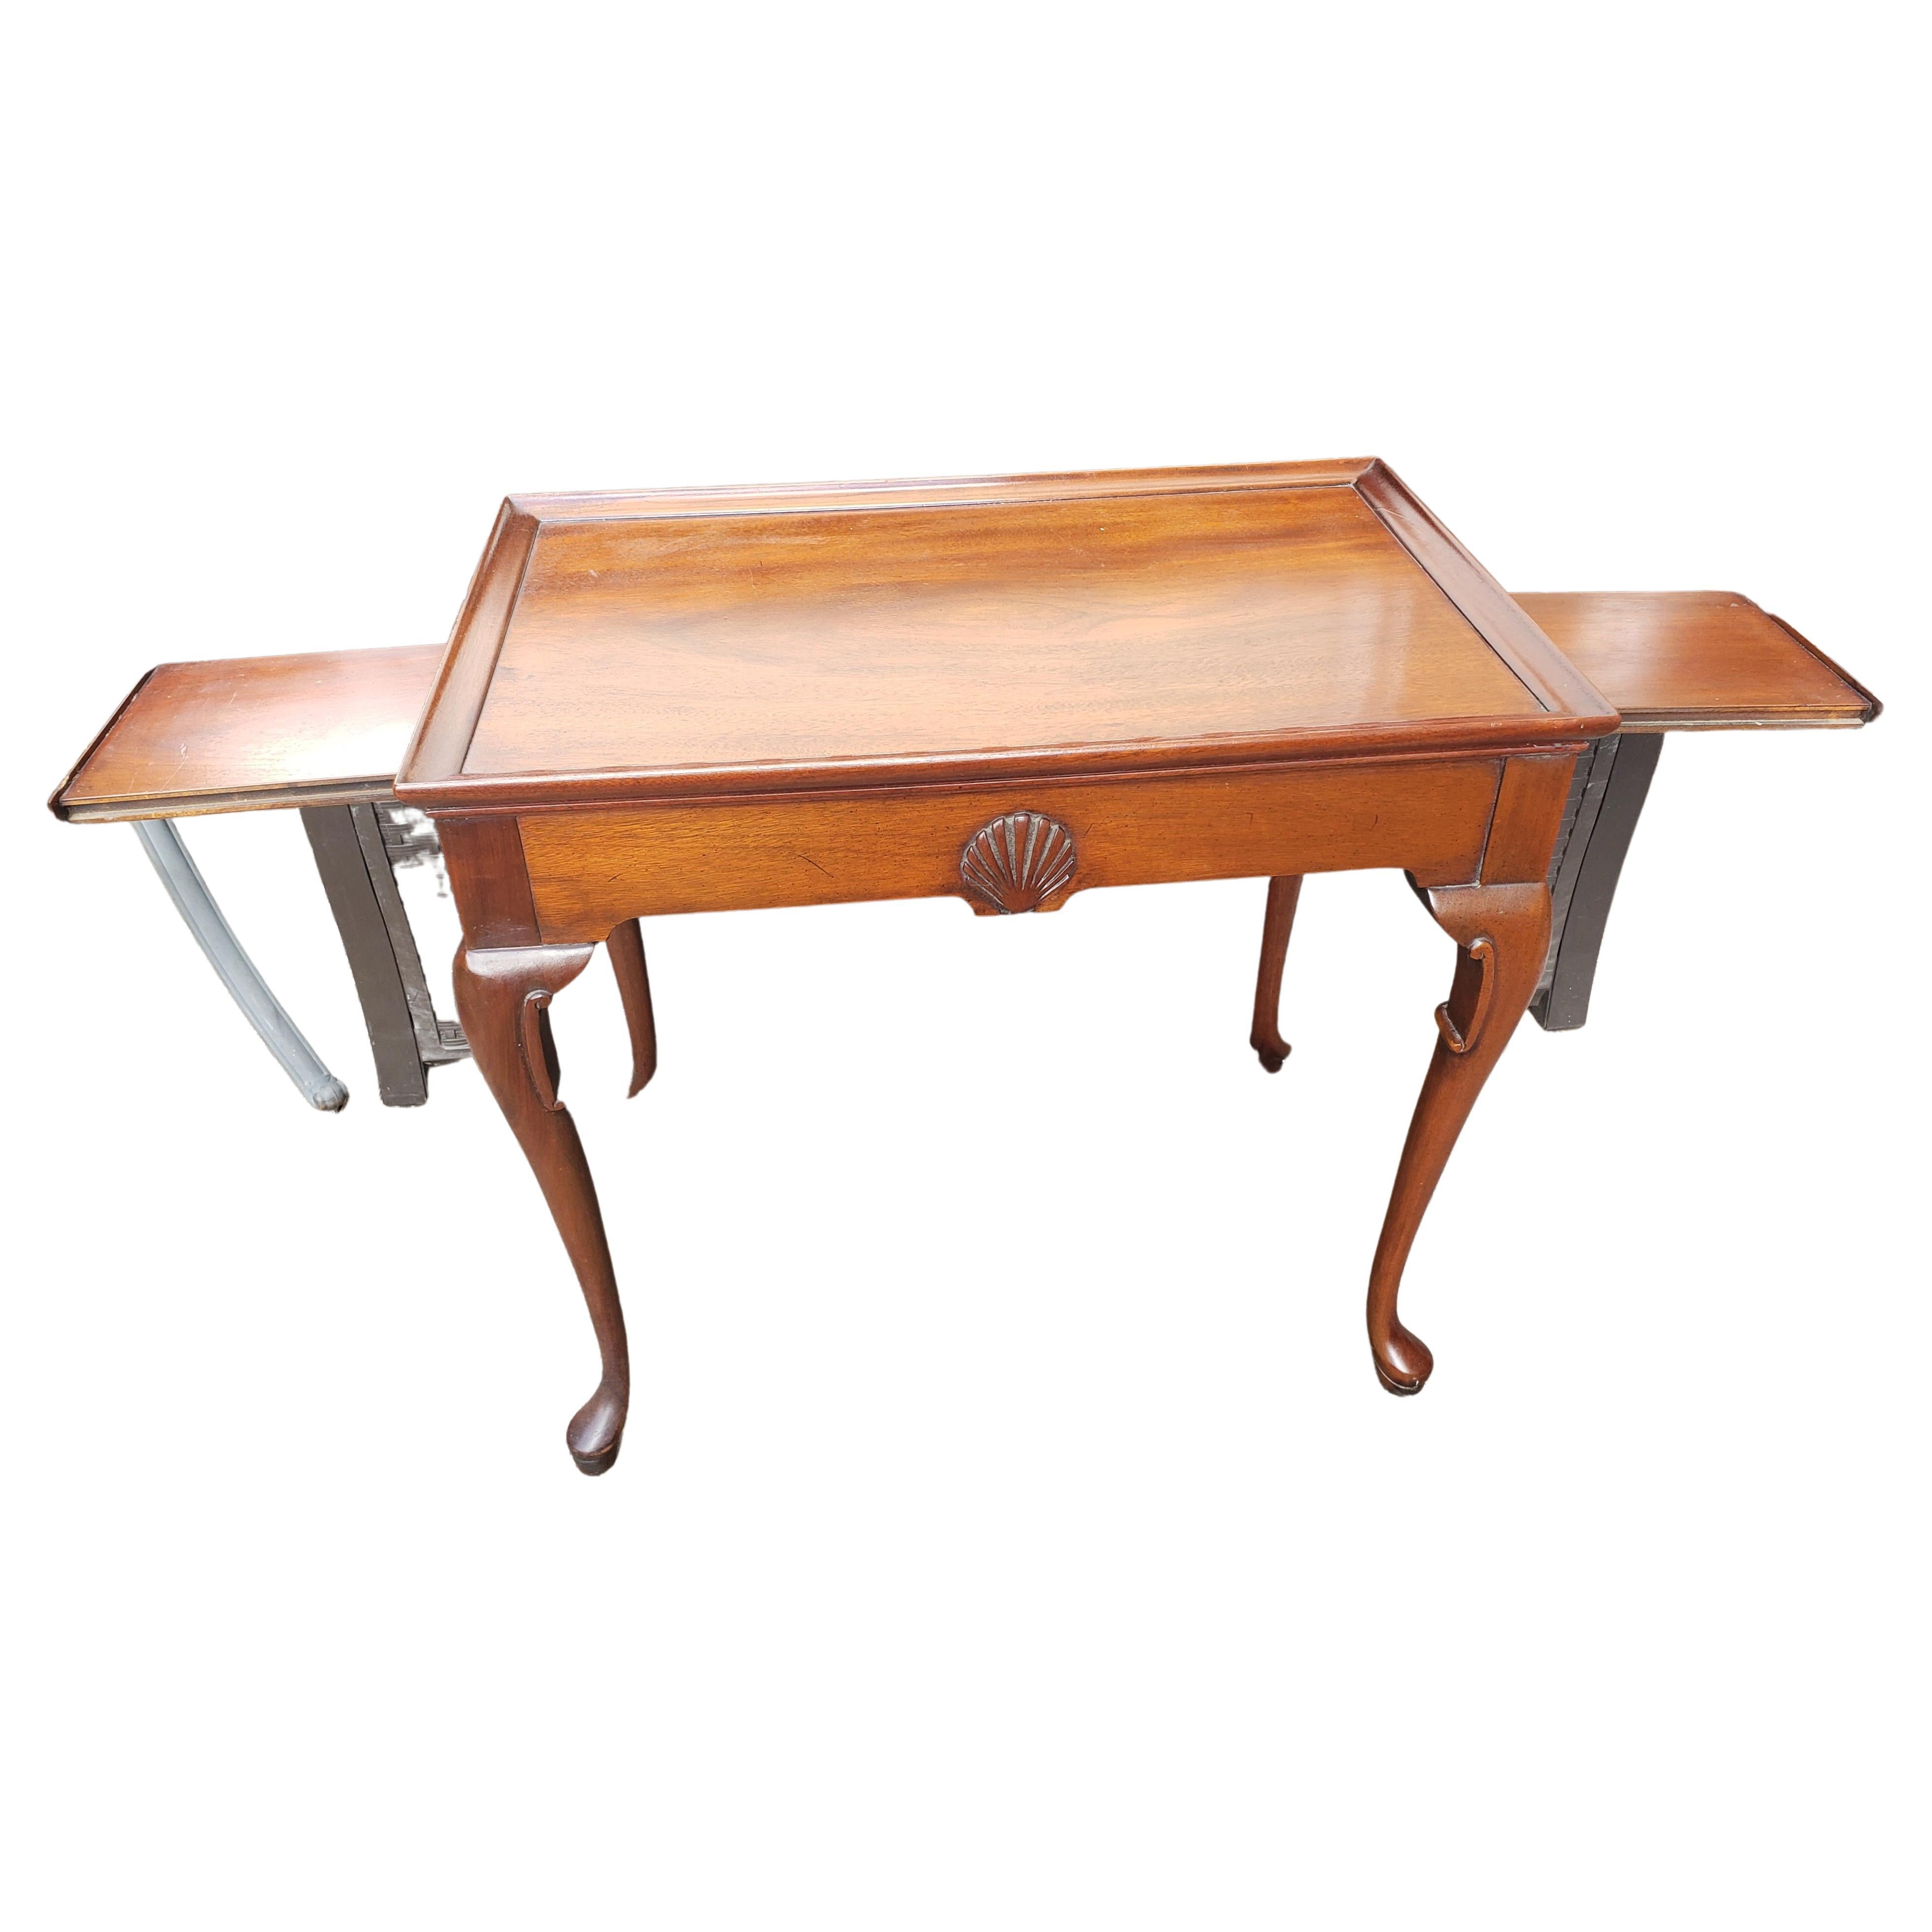 Woodwork 1950s English Mahogany Queen Anne Tray Top Tea Table by Hickory Chair Co. For Sale